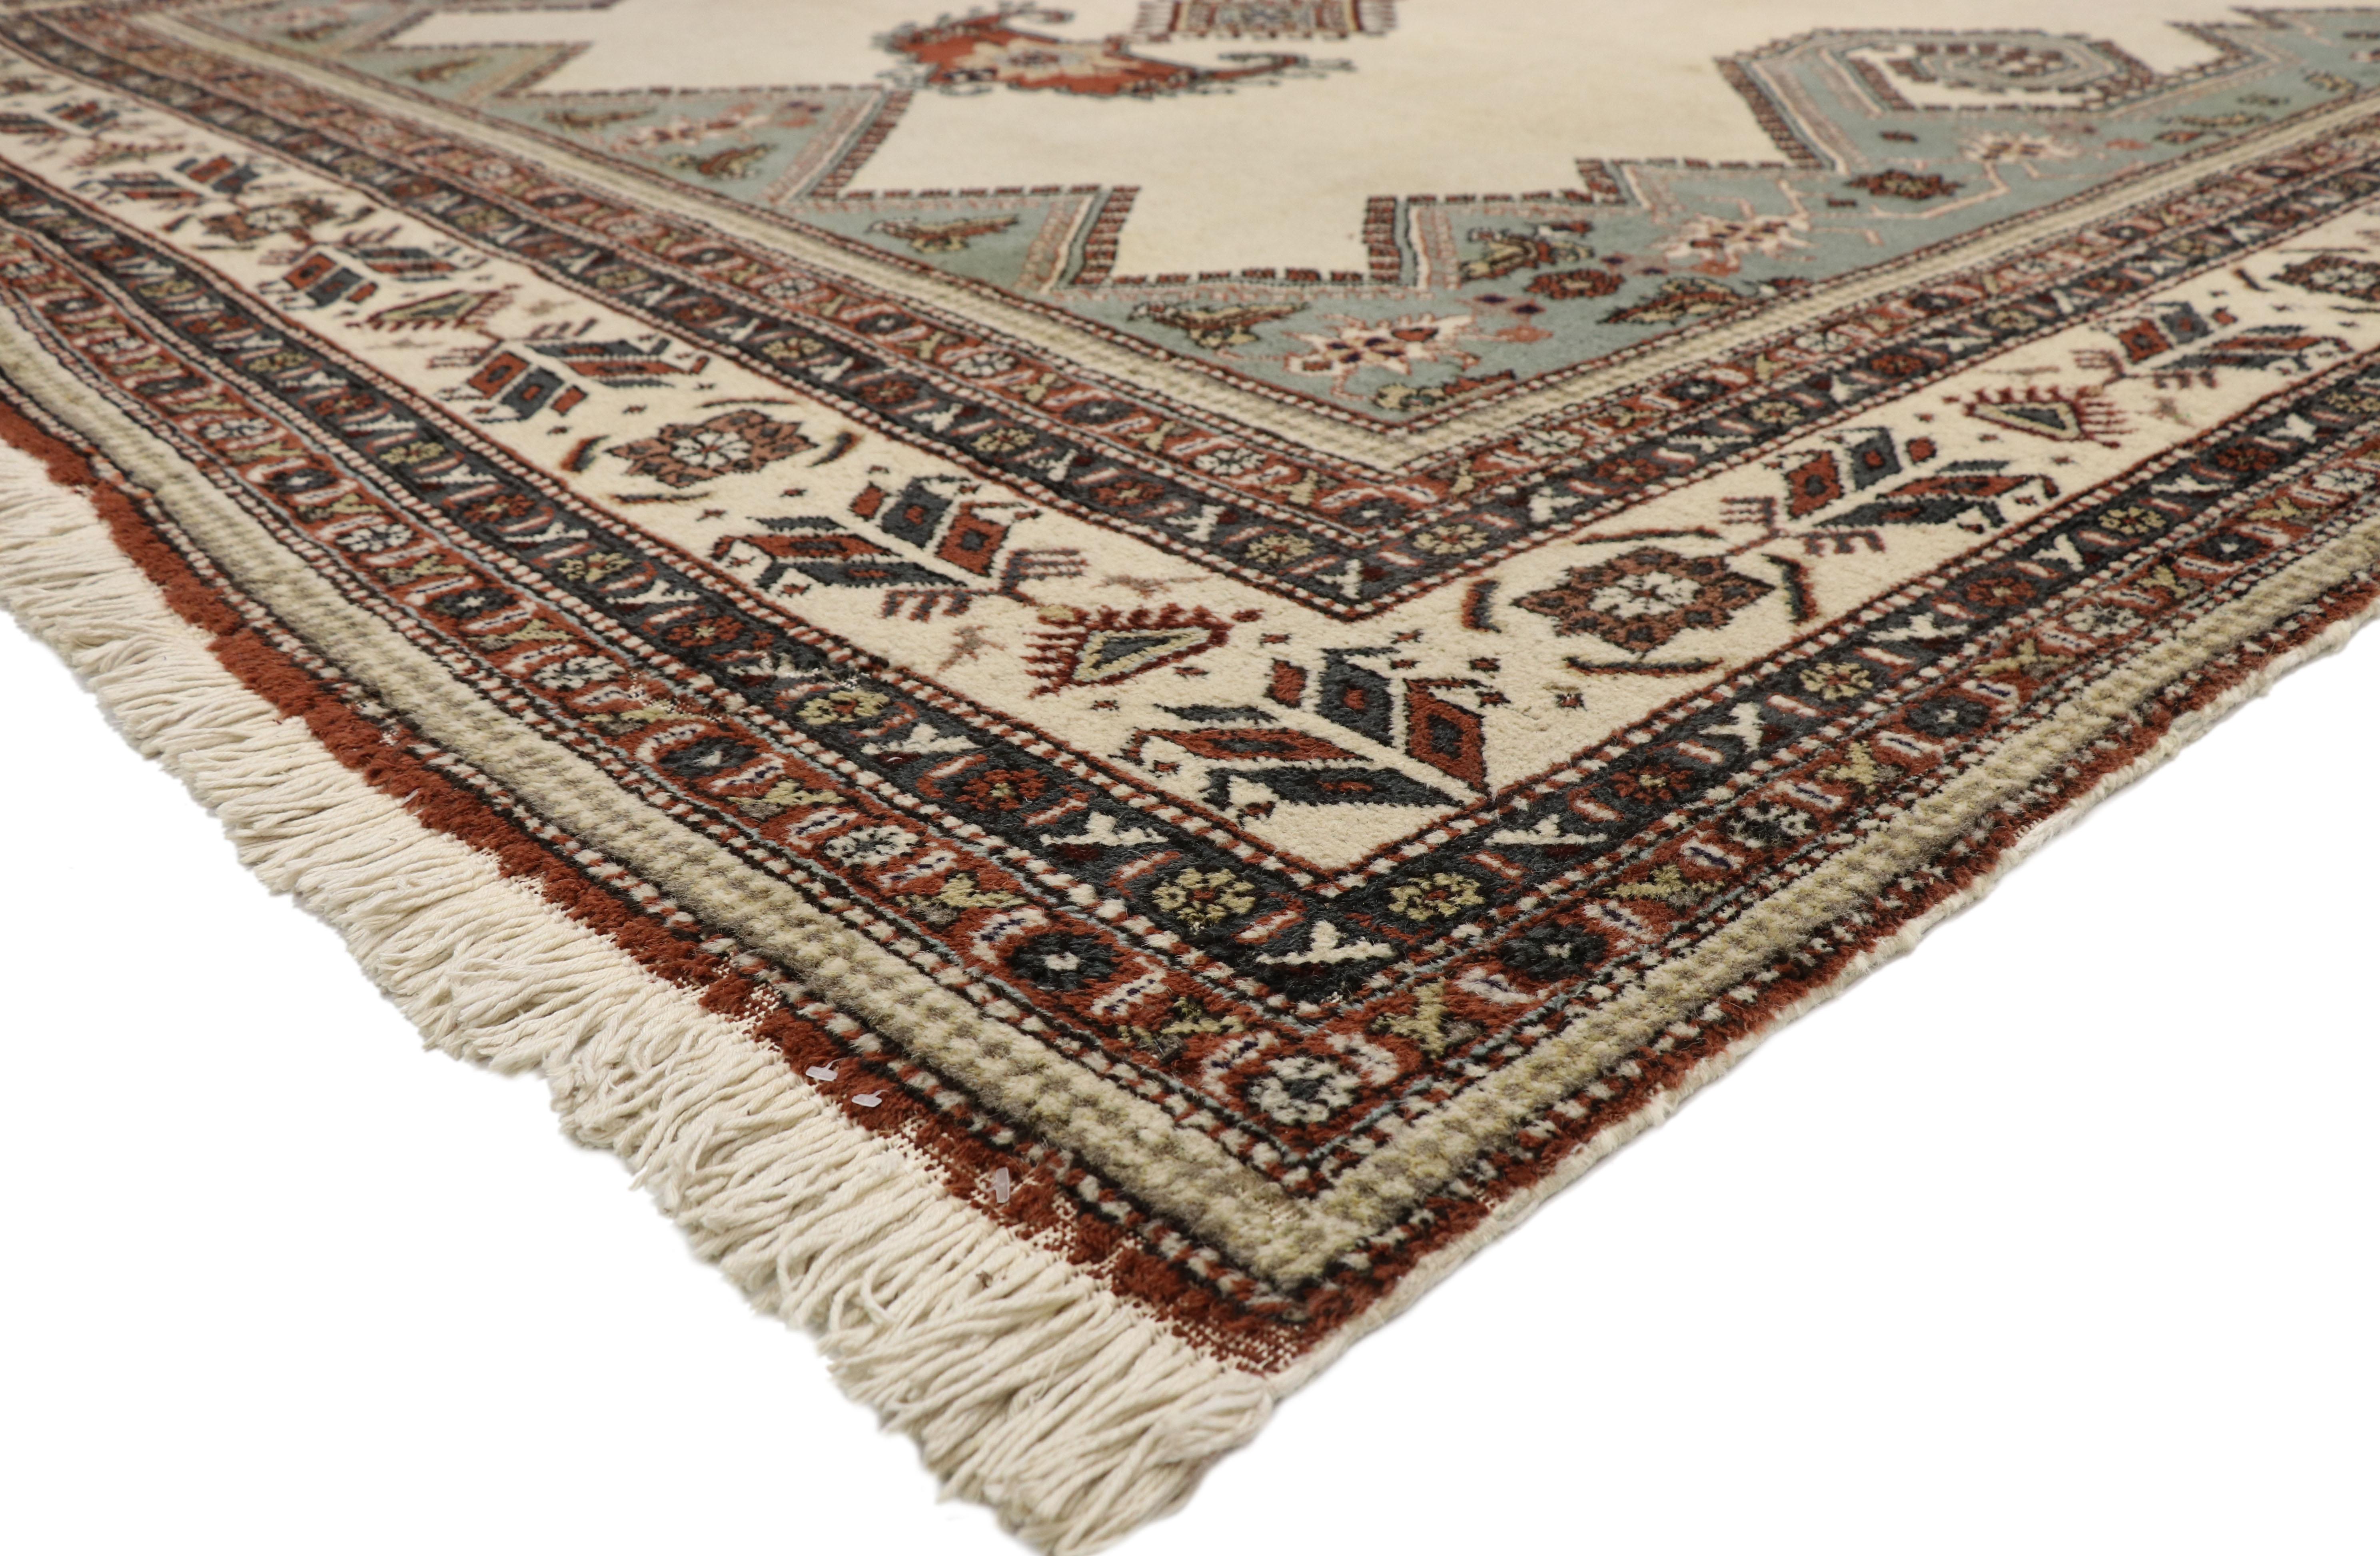 77362, vintage Turkish Sparta rug with Caucasian Qashqai Shiraz tribal style. Displaying nomadic charm and nomadic tribal style, this vintage Turkish Sparta rug is an amalgam of Caucasian Qashqai tribe influence. This hand knotted wool vintage